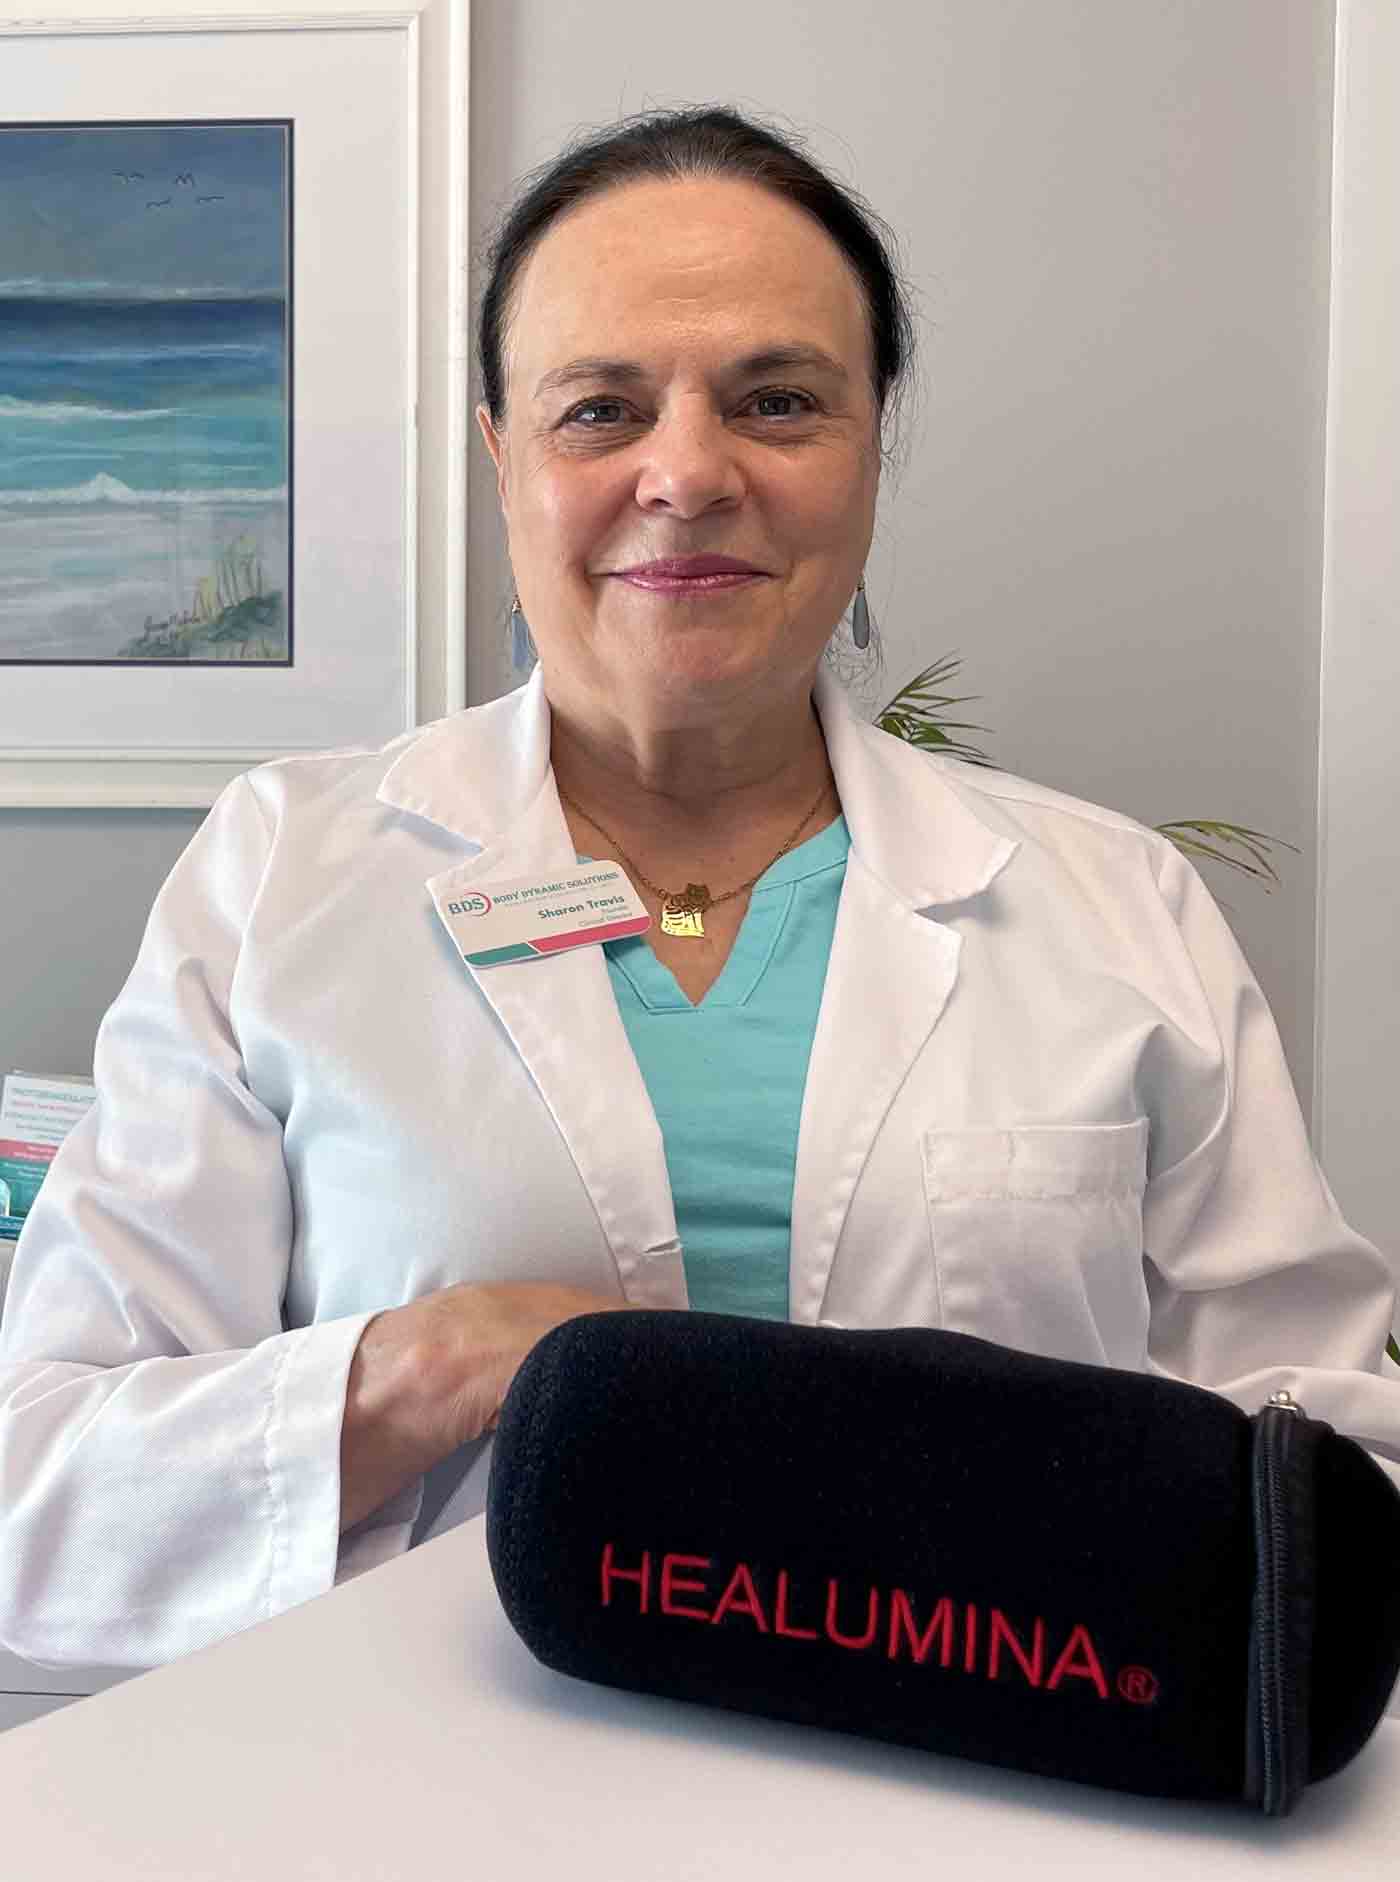 Sharon Travis standing next to counter with HEALUMINA device in black zippered bag.